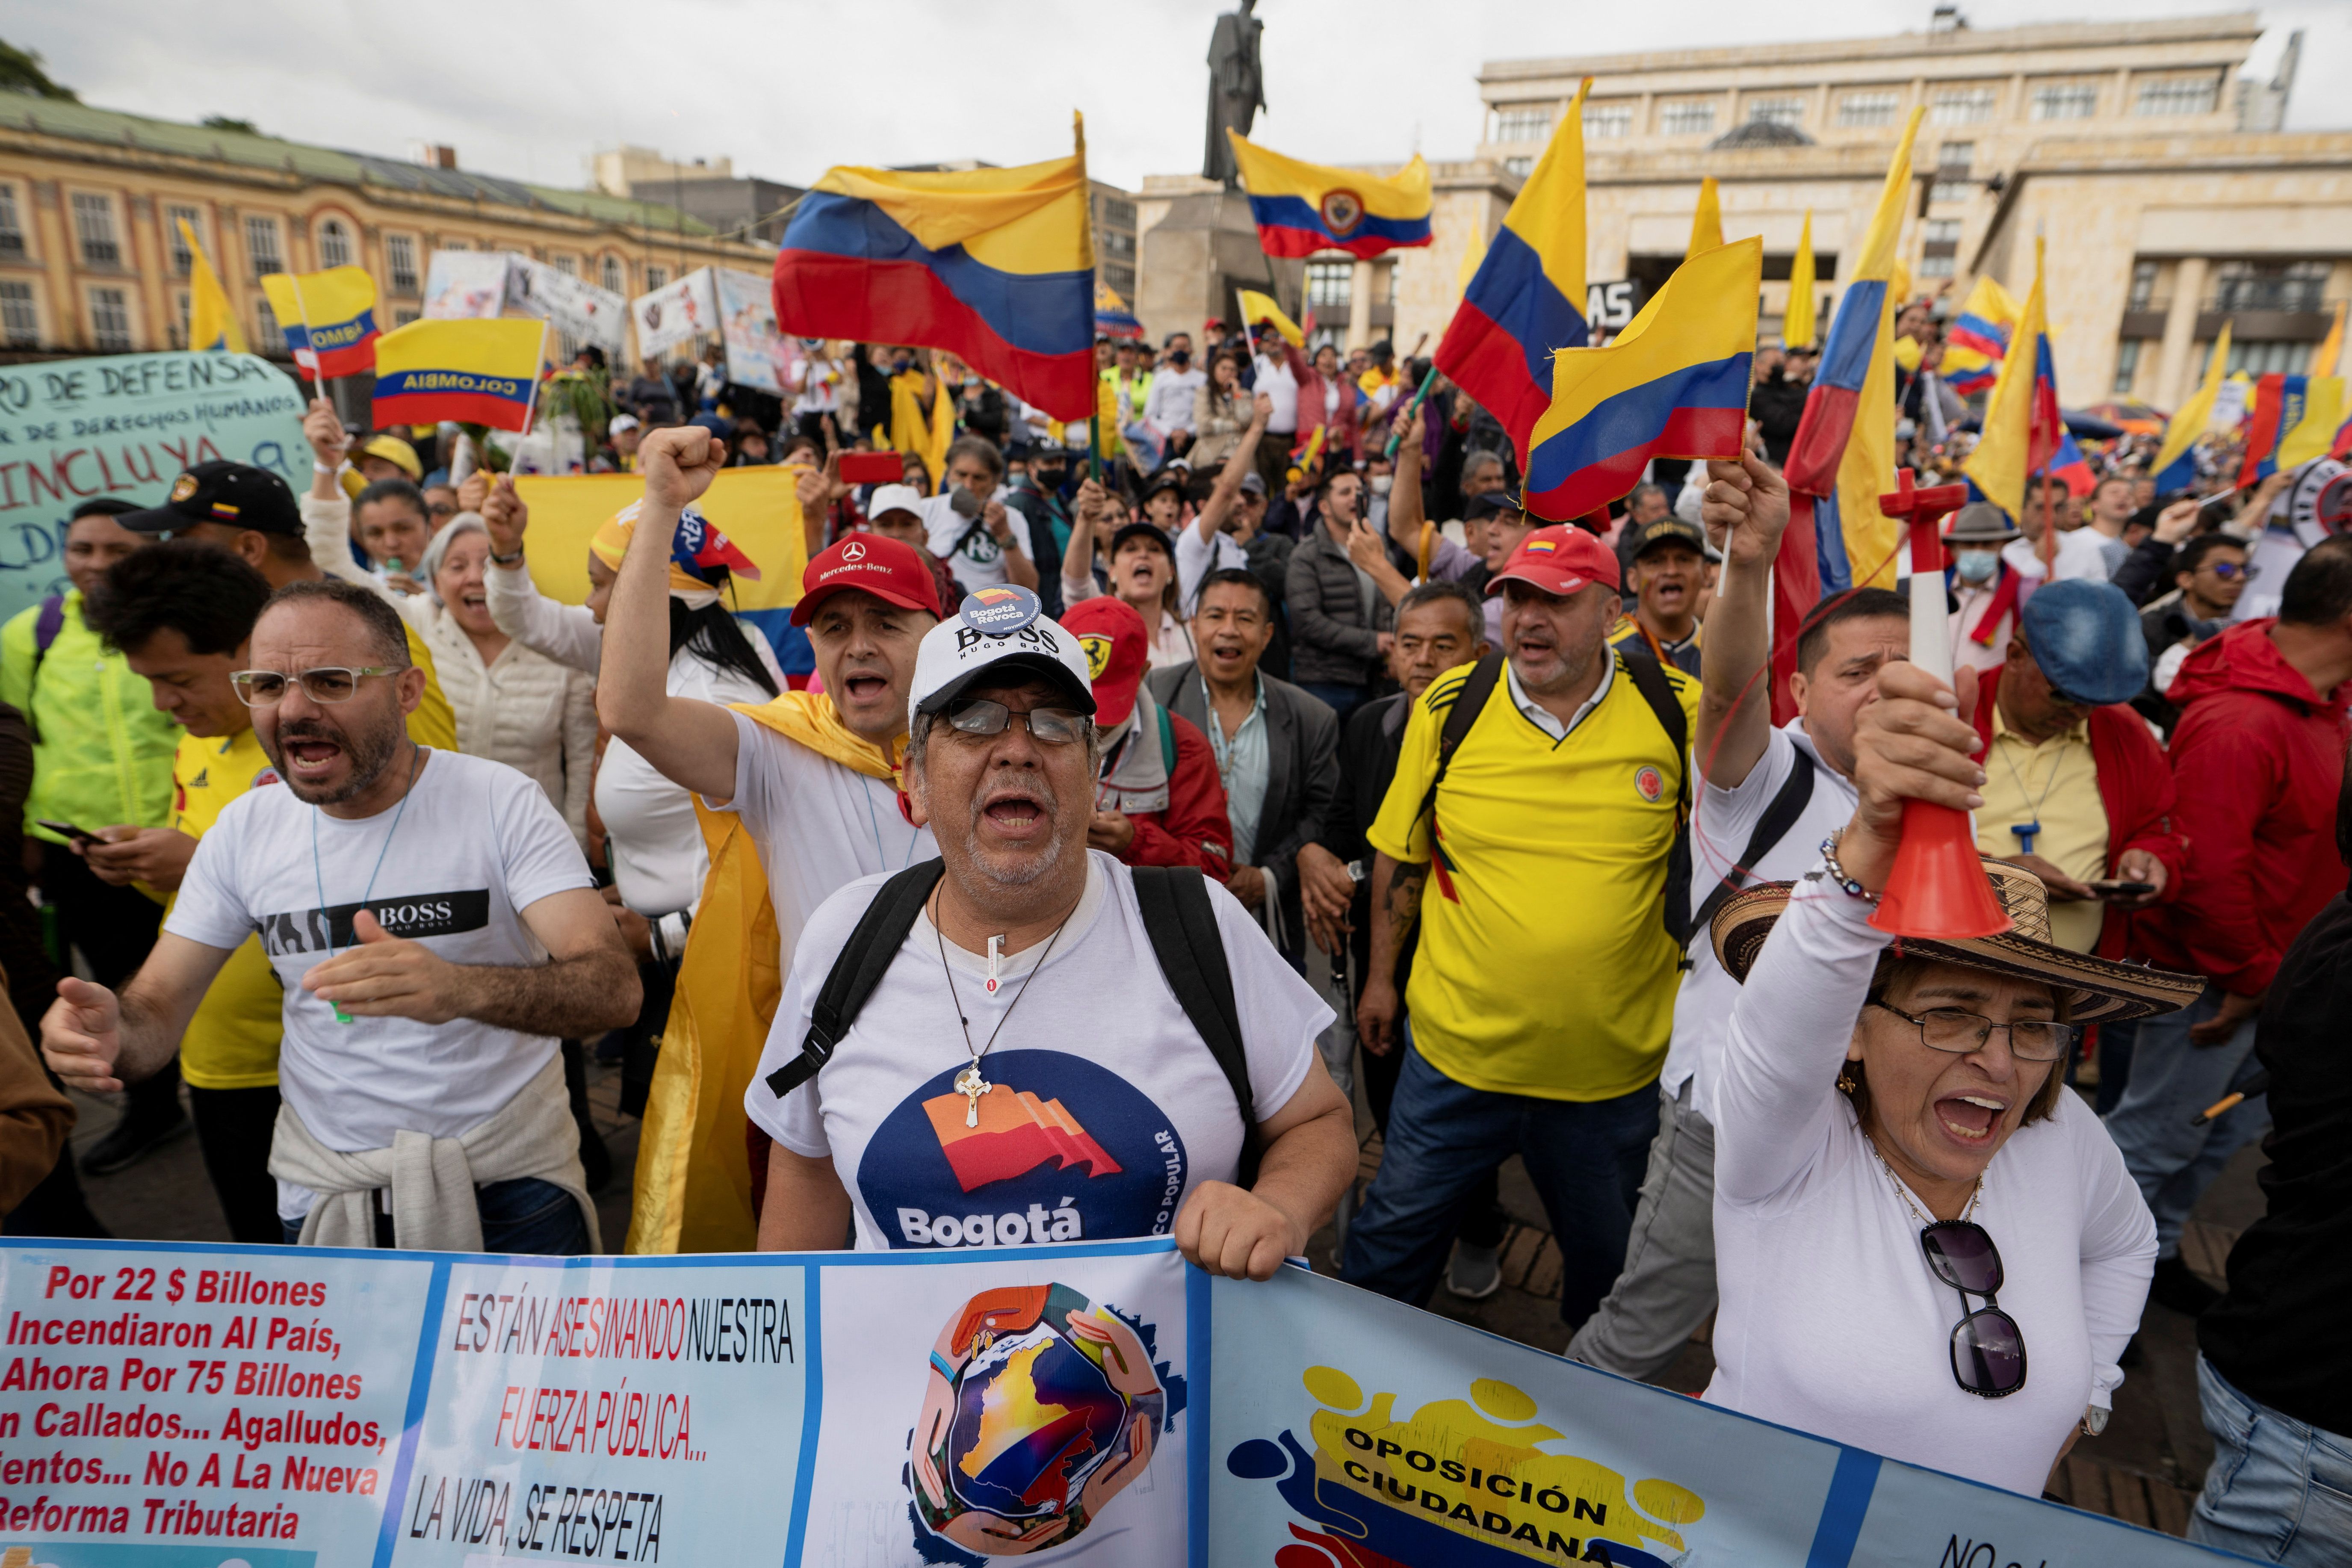 People march to protest against a tax reform proposed by the government of leftist President Gustavo Petro, in Cali, Colombia.